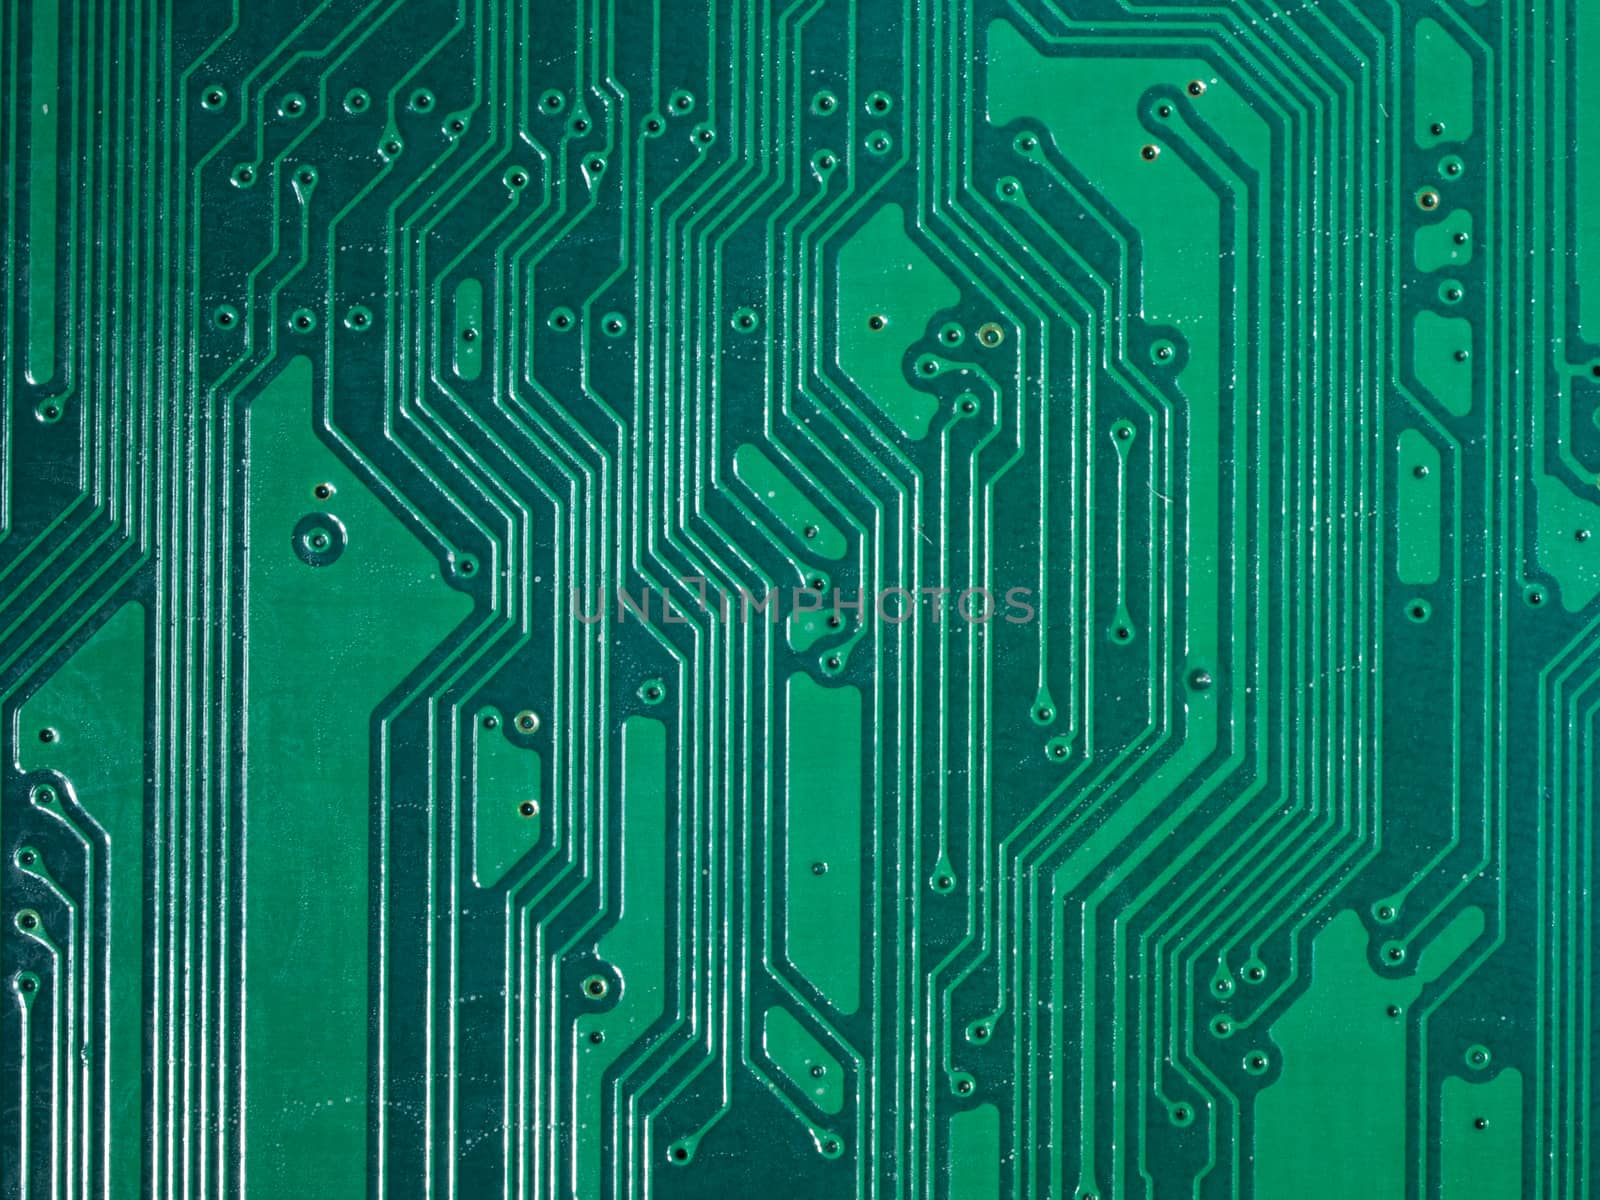 printed circuit for electronic components by jmagfoto